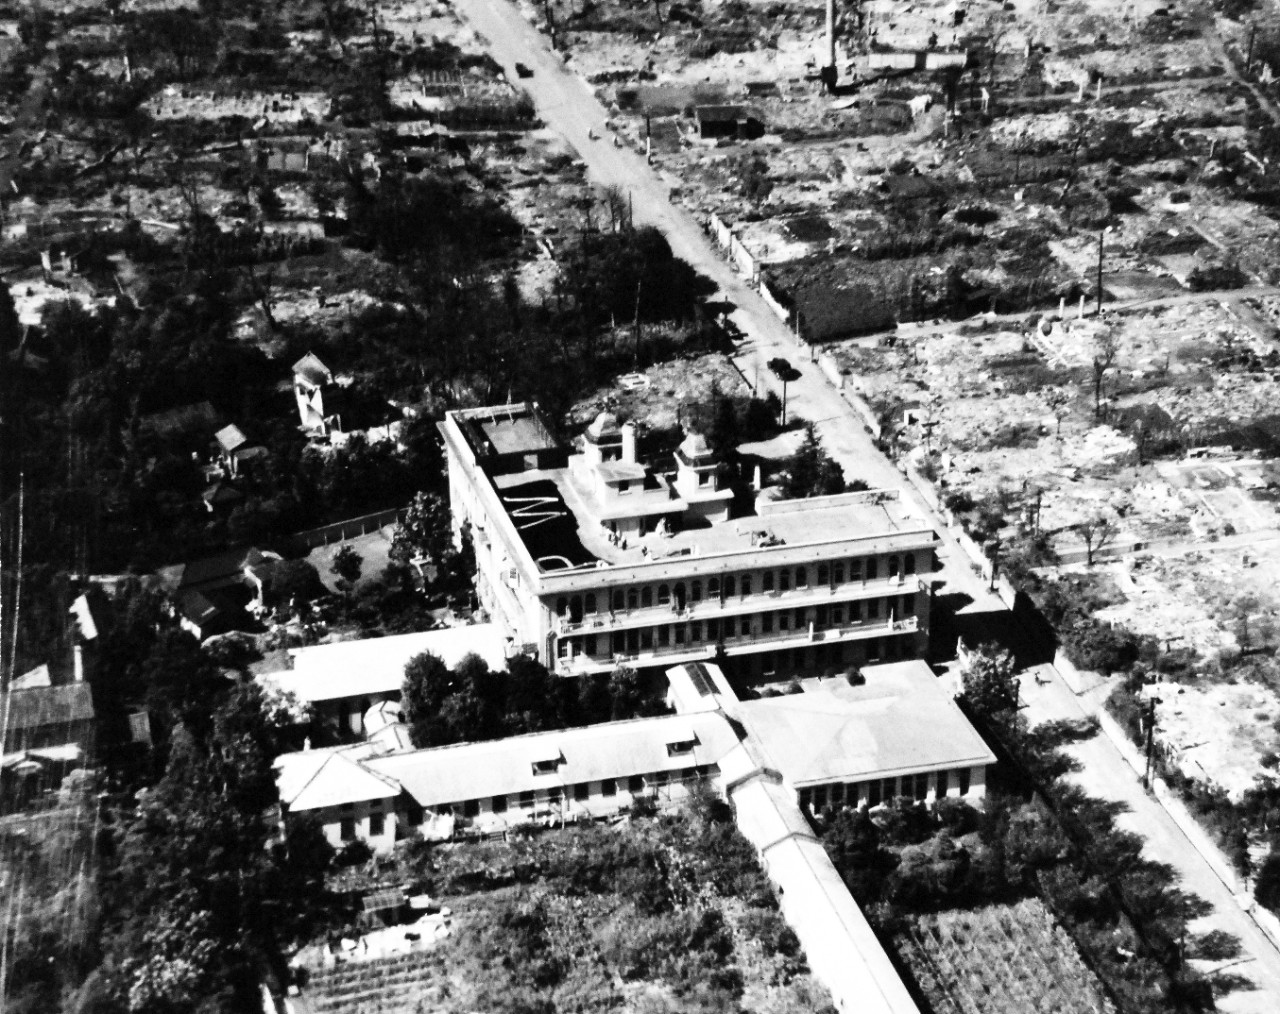 80-G-344489:   Allied Prisoner of War Building, Tokyo, Japan, 1945.    Prisoner of War building at Tokyo, Japan, with people on the roof.  Taken by plane from USS Essex (CV-9), PHOM1/C P.J.Madden, PHOM3/C H.C. Stoker, August 28, 1945. Official U.S. Navy photograph, now in the collection of the National Archives.  (2014/05/22).    The original photograph is small.   